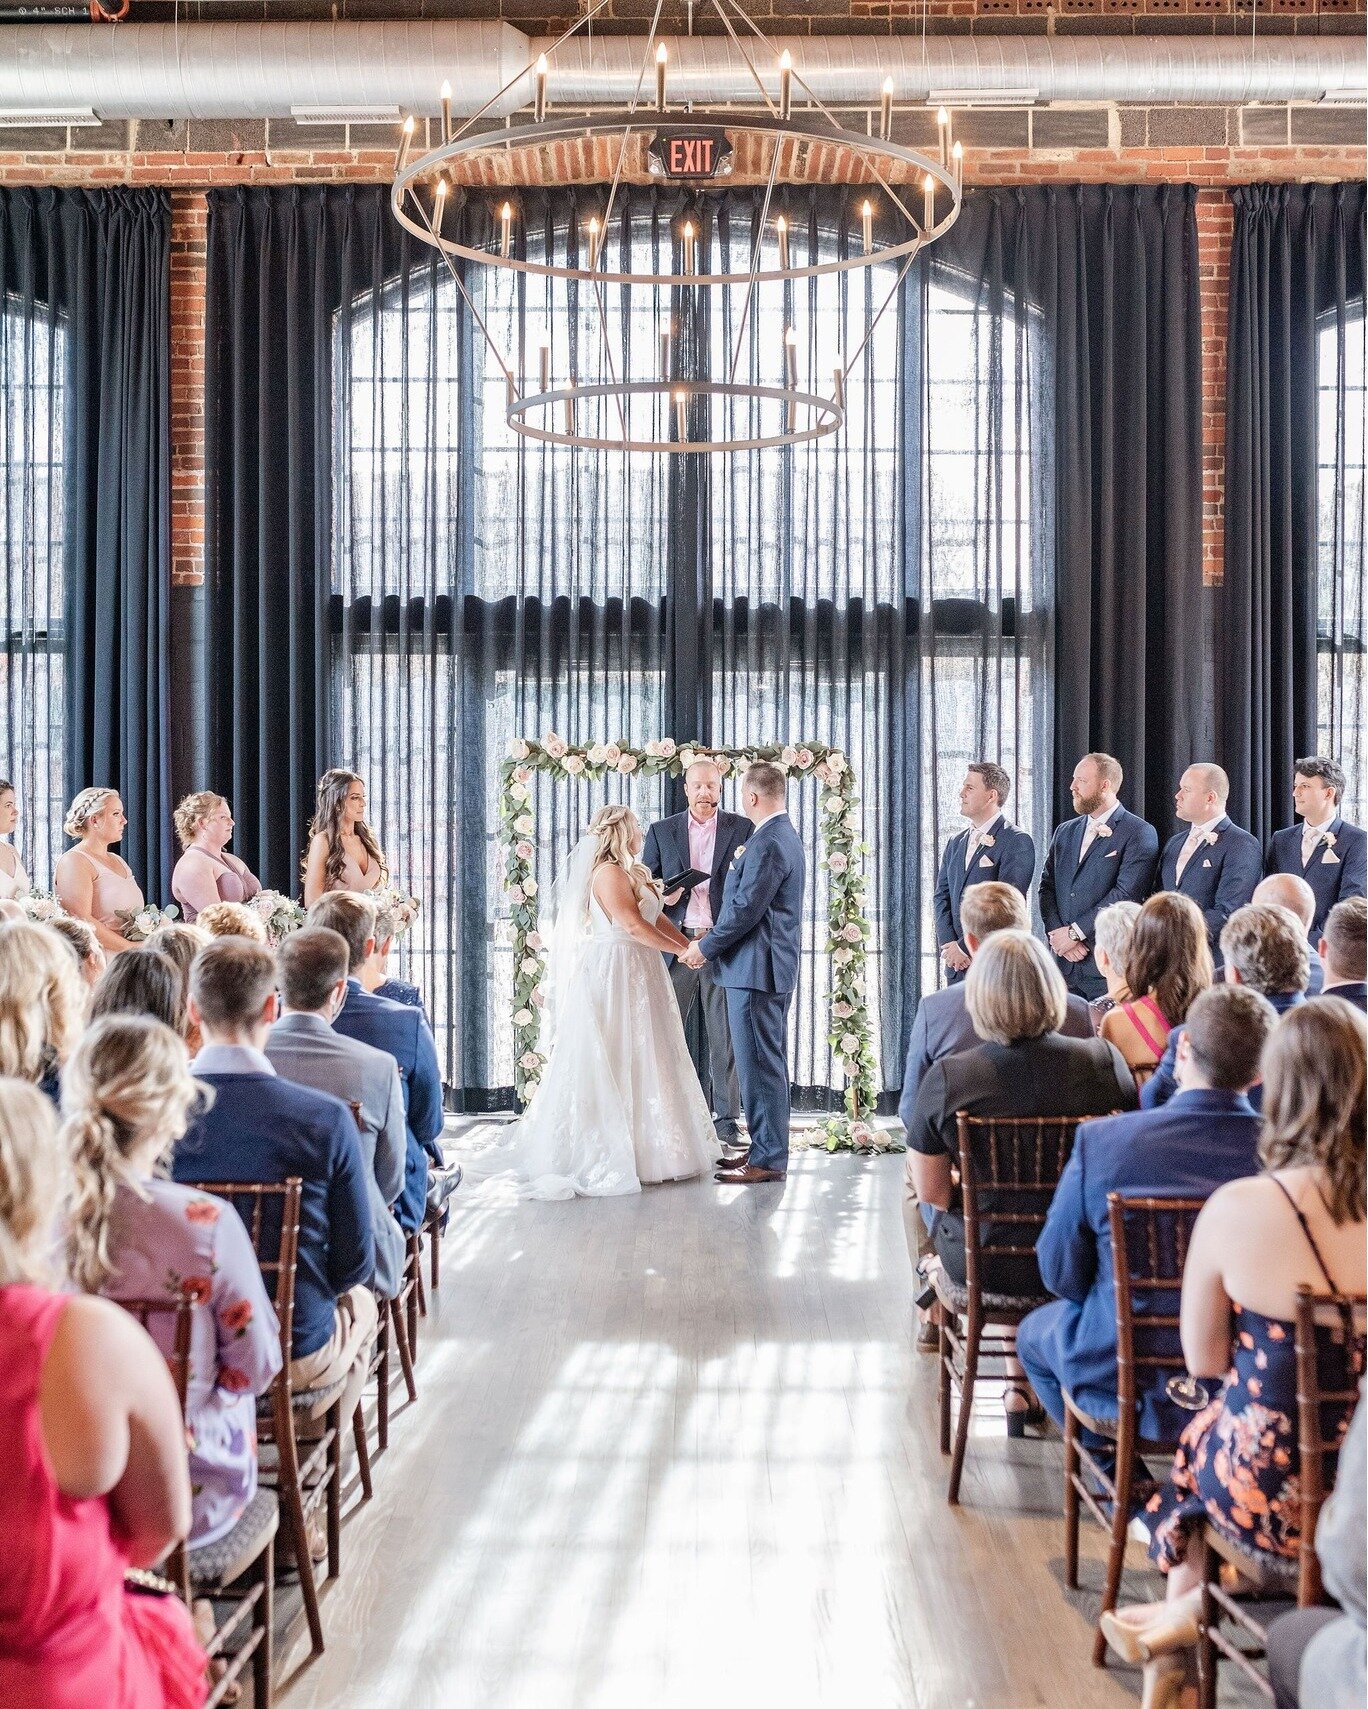 We love our moody High Line moments... but there's something just so soft and dreamy about bright sunshine filtering through the windows. 🥰 

Photography by @stephanielynnkase 
Florals by @flowermanflowers 

Image descriptions:
Image one: A bride an